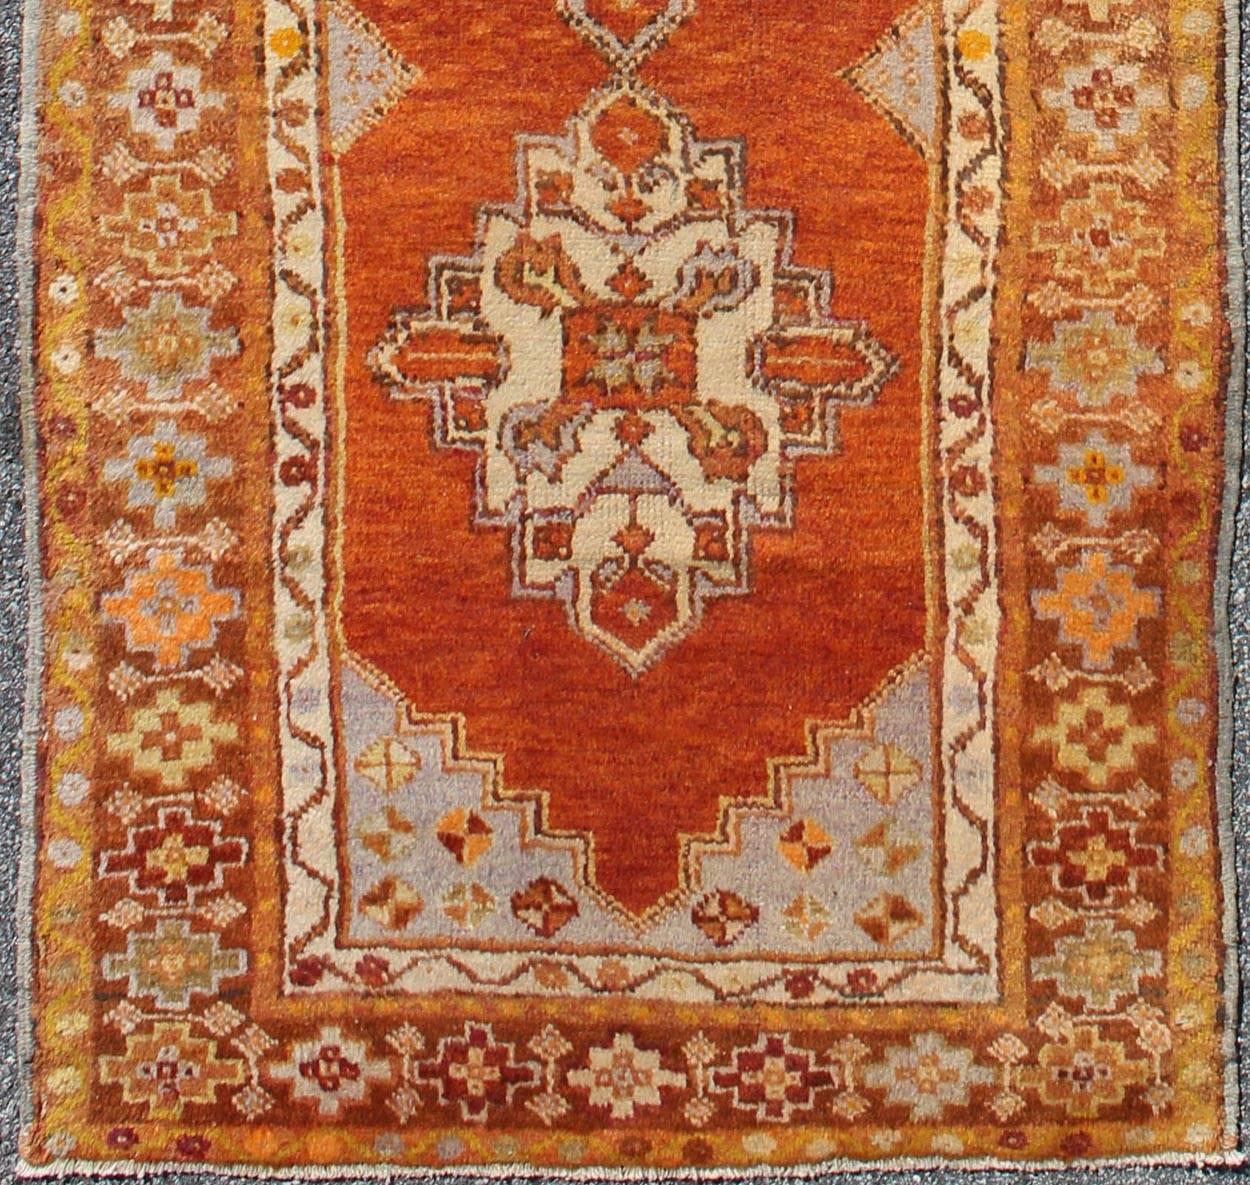 Antique Turkish Oushak runner with geometric diamond medallions, rug en-150, country of origin / type: Turkey / Oushak, circa 1930

This antique Oushak runner features a unique blend of cheerful colors and an intricately beautiful design. The